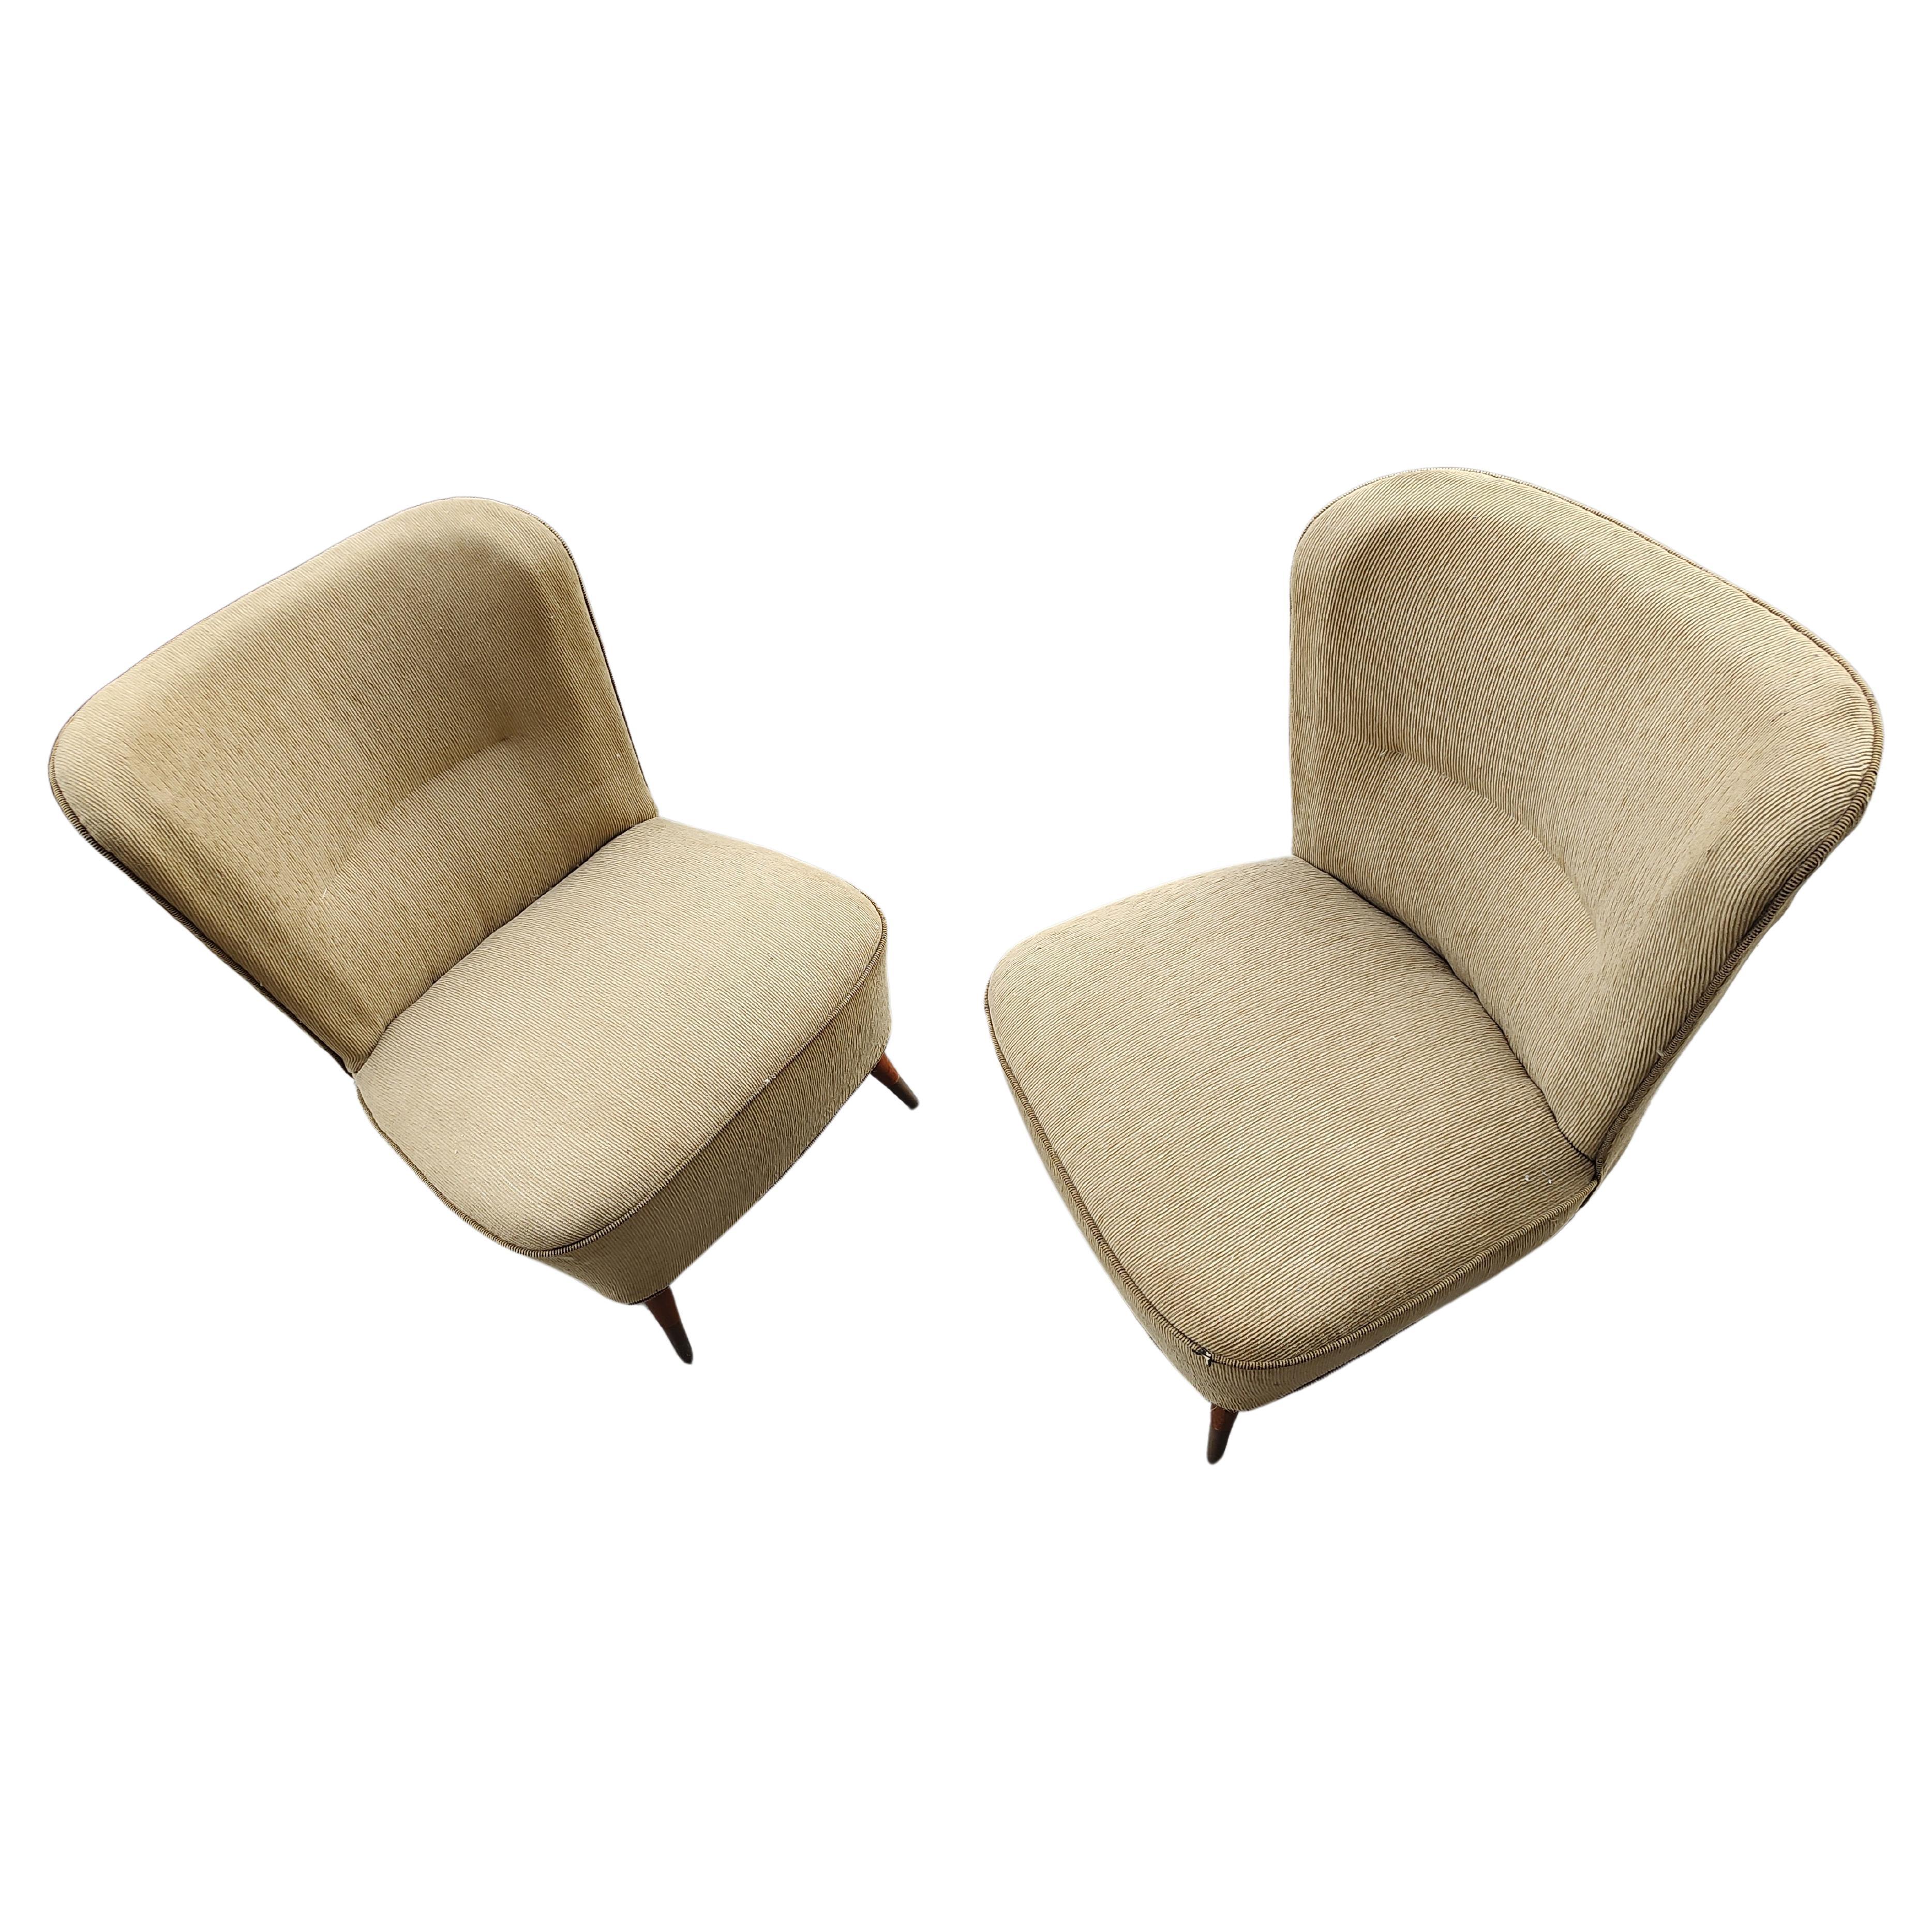 Mid-Century Modern Pair of Mid Century Modern Sculptural Italian Styled Slipper Chairs C1950 For Sale